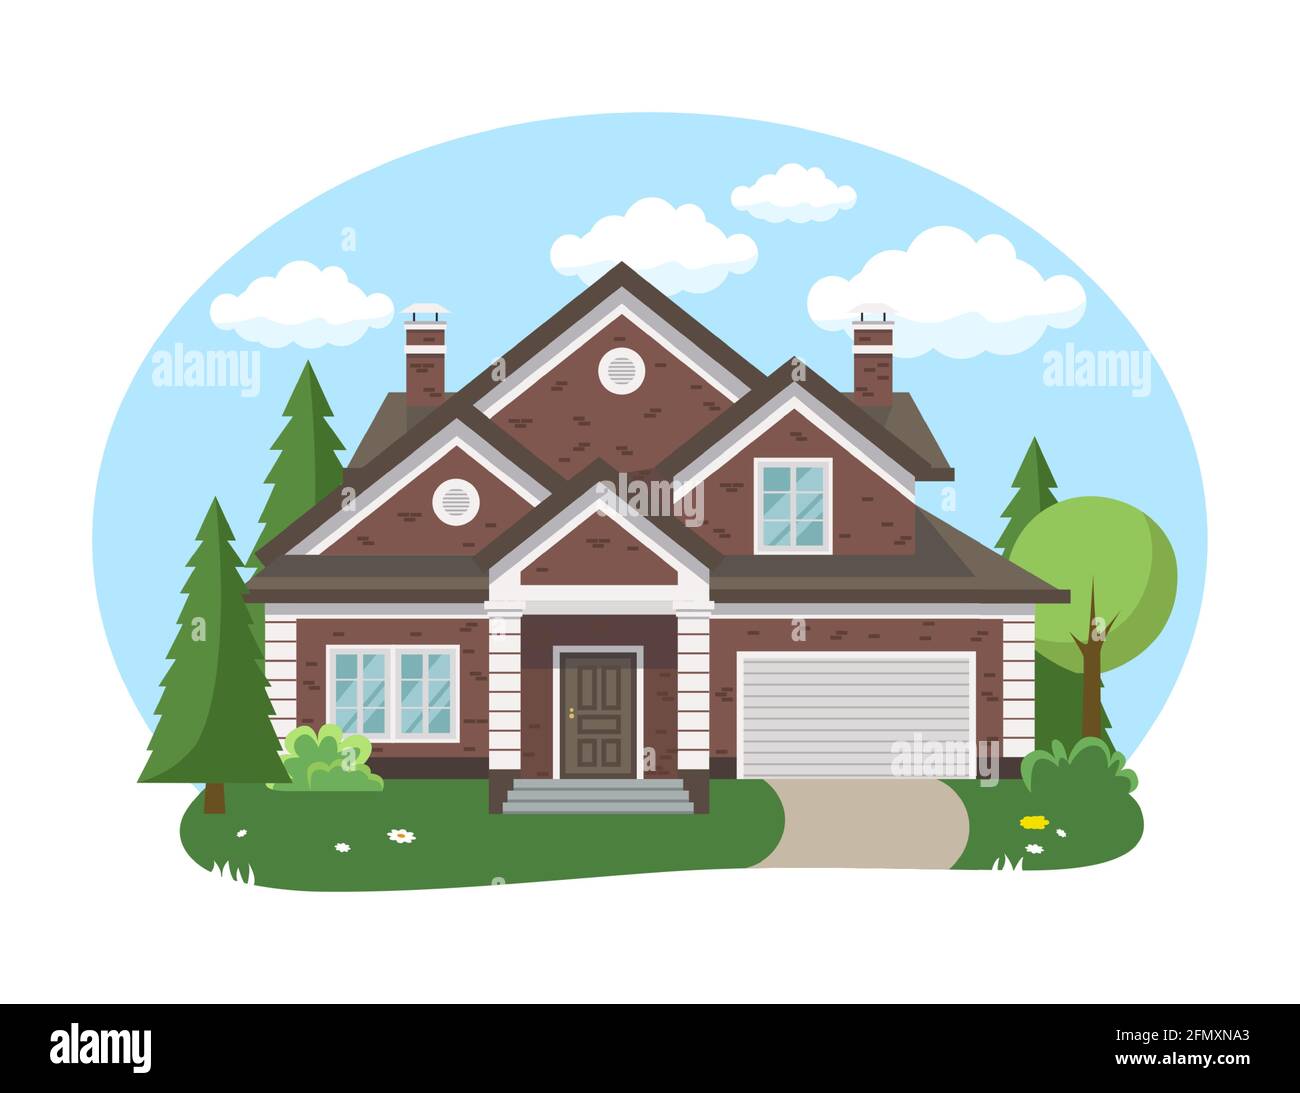 Cartoon house exterior with blue clouded sky Front Home Architecture Concept Flat Design Style. Vector illustration of Facade Building Stock Vector